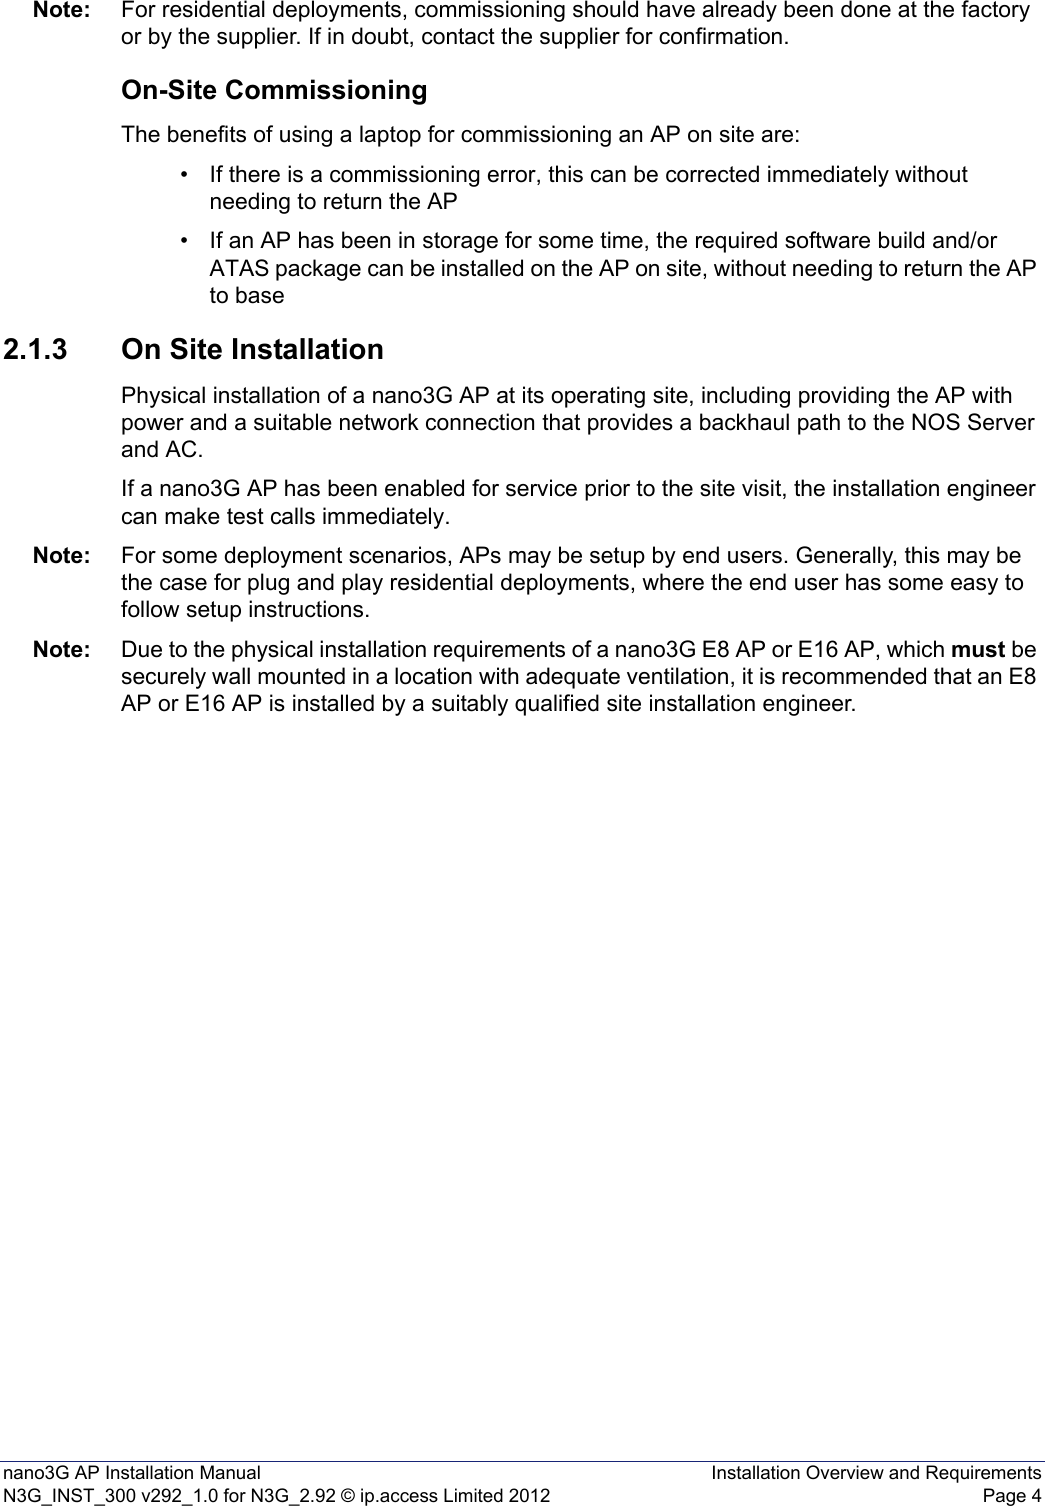 nano3G AP Installation Manual Installation Overview and RequirementsN3G_INST_300 v292_1.0 for N3G_2.92 © ip.access Limited 2012 Page 4Note: For residential deployments, commissioning should have already been done at the factory or by the supplier. If in doubt, contact the supplier for confirmation.On-Site CommissioningThe benefits of using a laptop for commissioning an AP on site are:• If there is a commissioning error, this can be corrected immediately without needing to return the AP • If an AP has been in storage for some time, the required software build and/or ATAS package can be installed on the AP on site, without needing to return the AP to base 2.1.3 On Site InstallationPhysical installation of a nano3G AP at its operating site, including providing the AP with power and a suitable network connection that provides a backhaul path to the NOS Server and AC. If a nano3G AP has been enabled for service prior to the site visit, the installation engineer can make test calls immediately. Note: For some deployment scenarios, APs may be setup by end users. Generally, this may be the case for plug and play residential deployments, where the end user has some easy to follow setup instructions.Note: Due to the physical installation requirements of a nano3G E8 AP or E16 AP, which must be securely wall mounted in a location with adequate ventilation, it is recommended that an E8 AP or E16 AP is installed by a suitably qualified site installation engineer. 